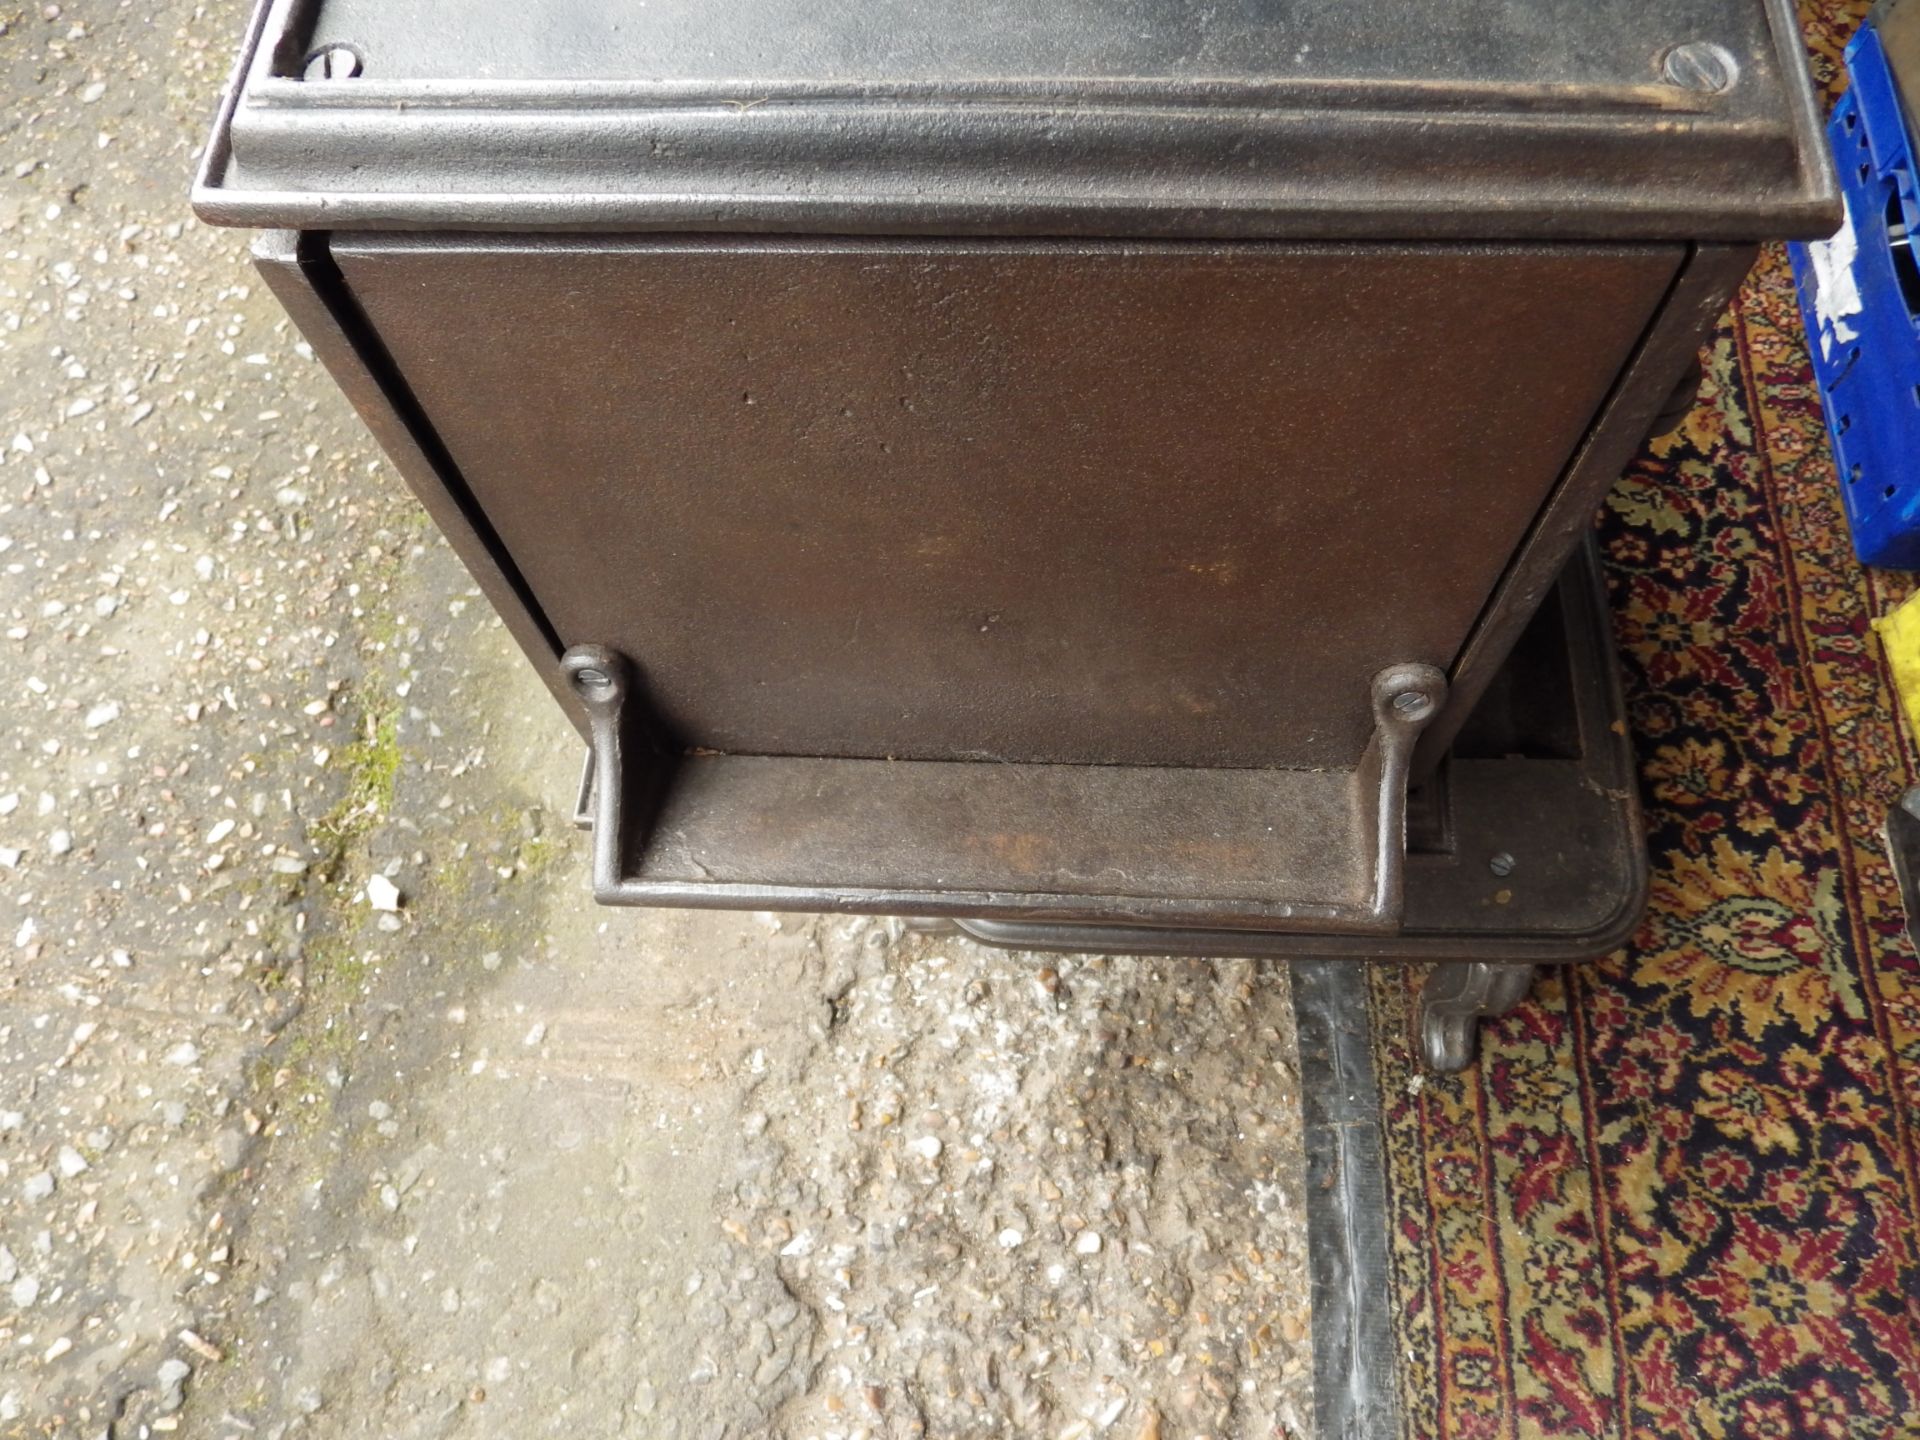 The Wee Ben tailors cast iron laundry stove with ornate door decorations incl two tailor goose irons - Image 3 of 10